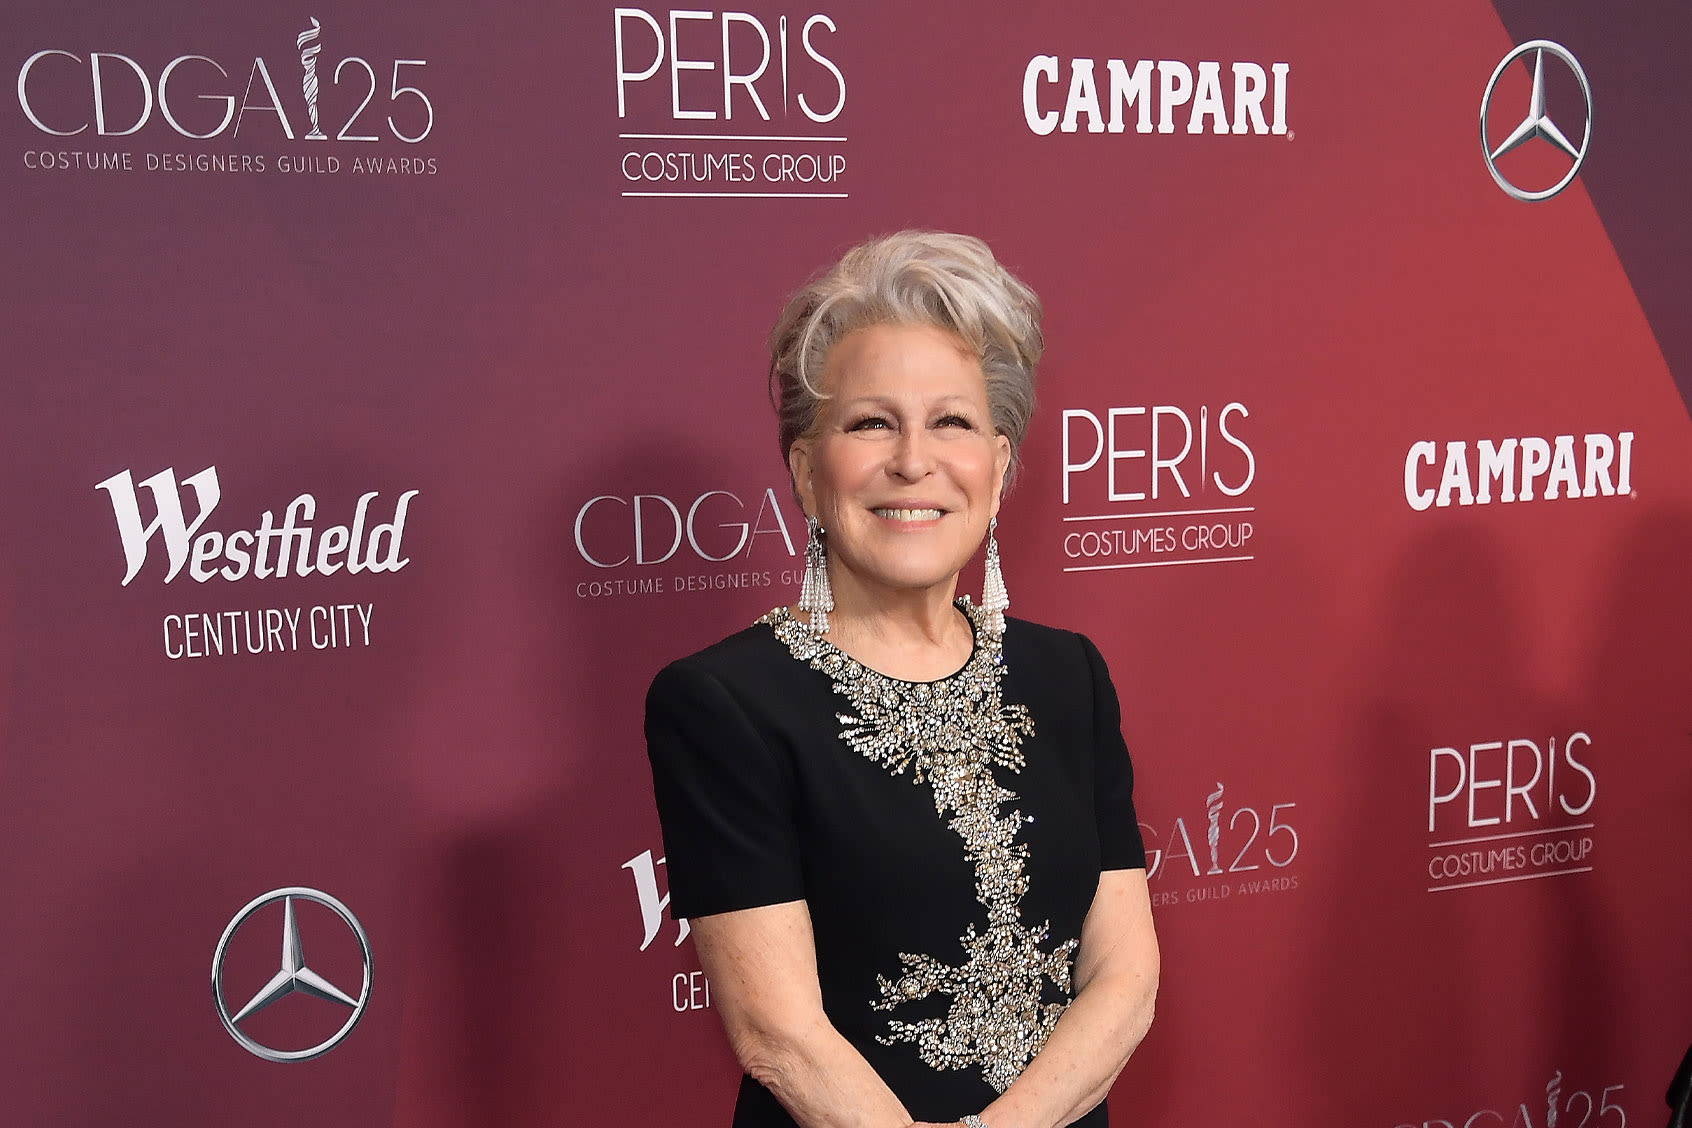 Bette Midler trolls SCOTUS with "Wizard of Oz" parody tune: "If you only had a heart!"